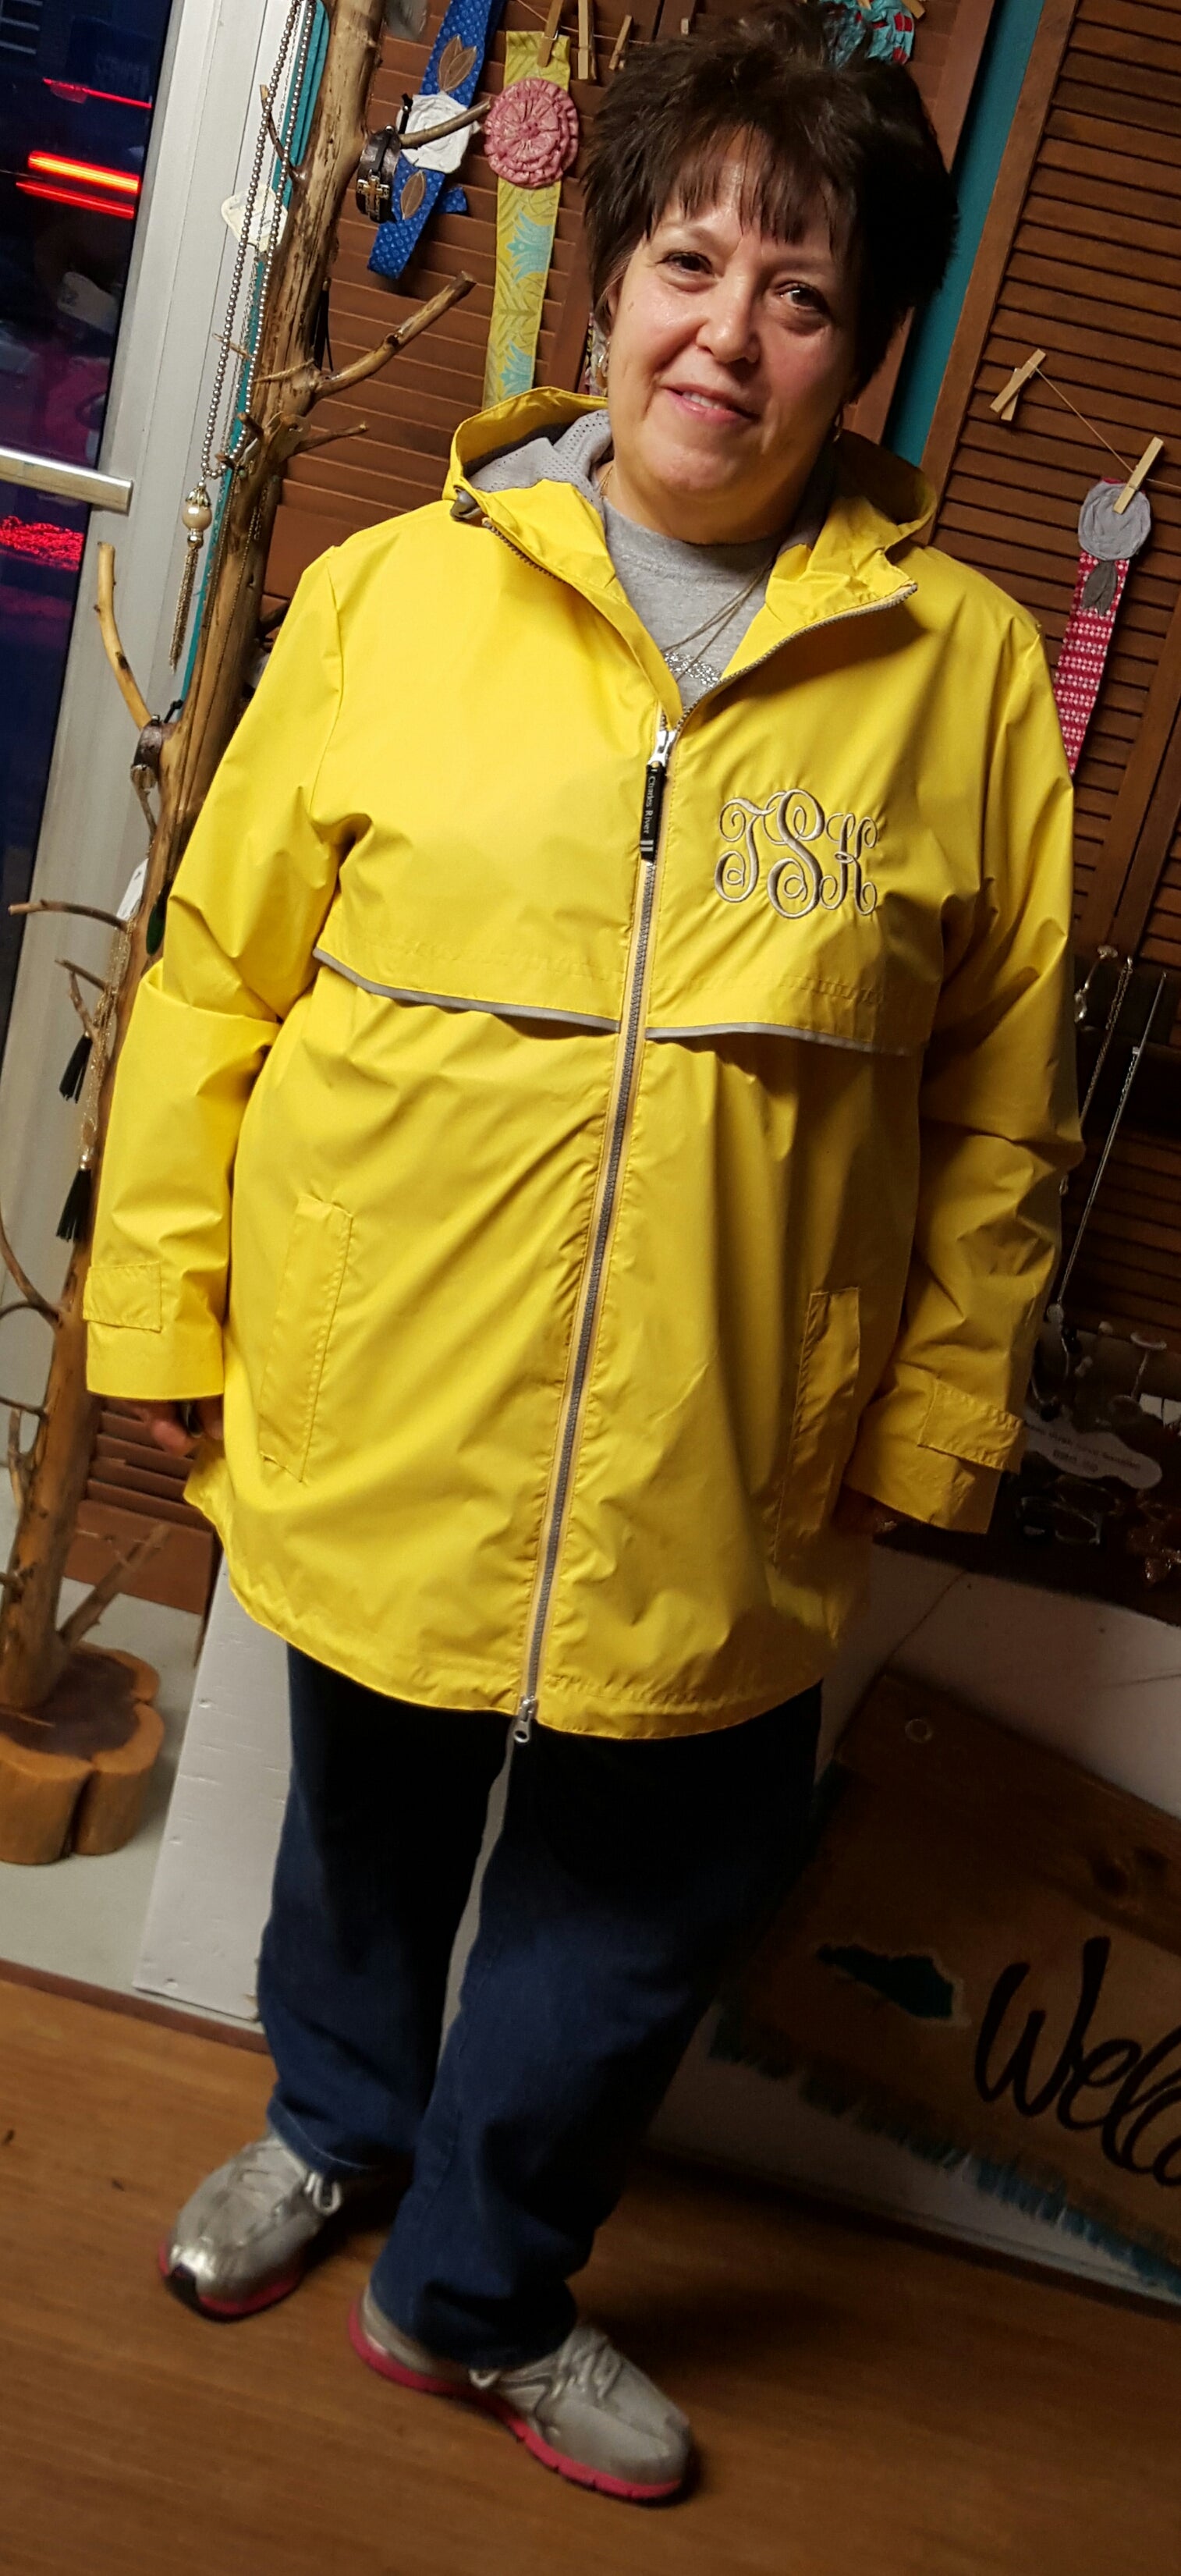 Monogrammed New Englander Rain Jacket – Southern Touch Monograms